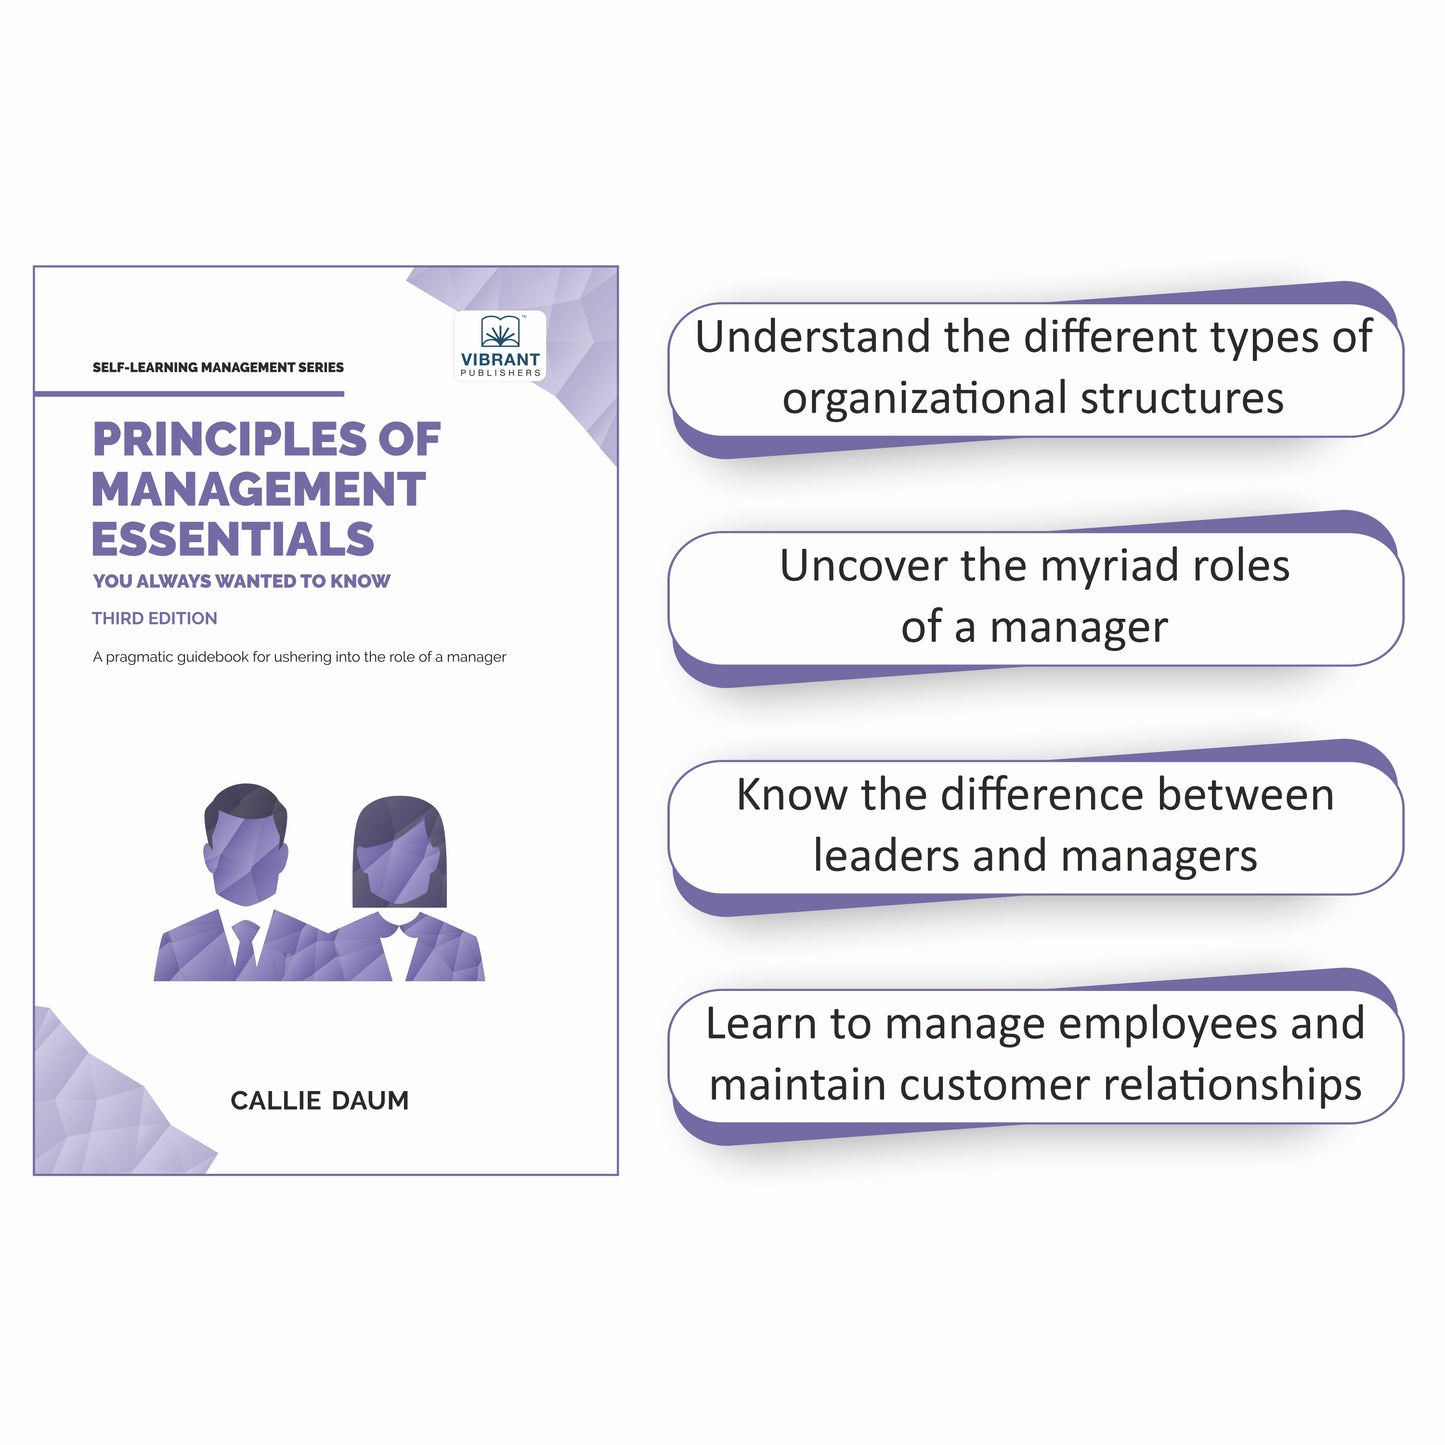 Management Essentials for Business Leaders and Professionals - Includes books for planning, managing and leading a business successfully